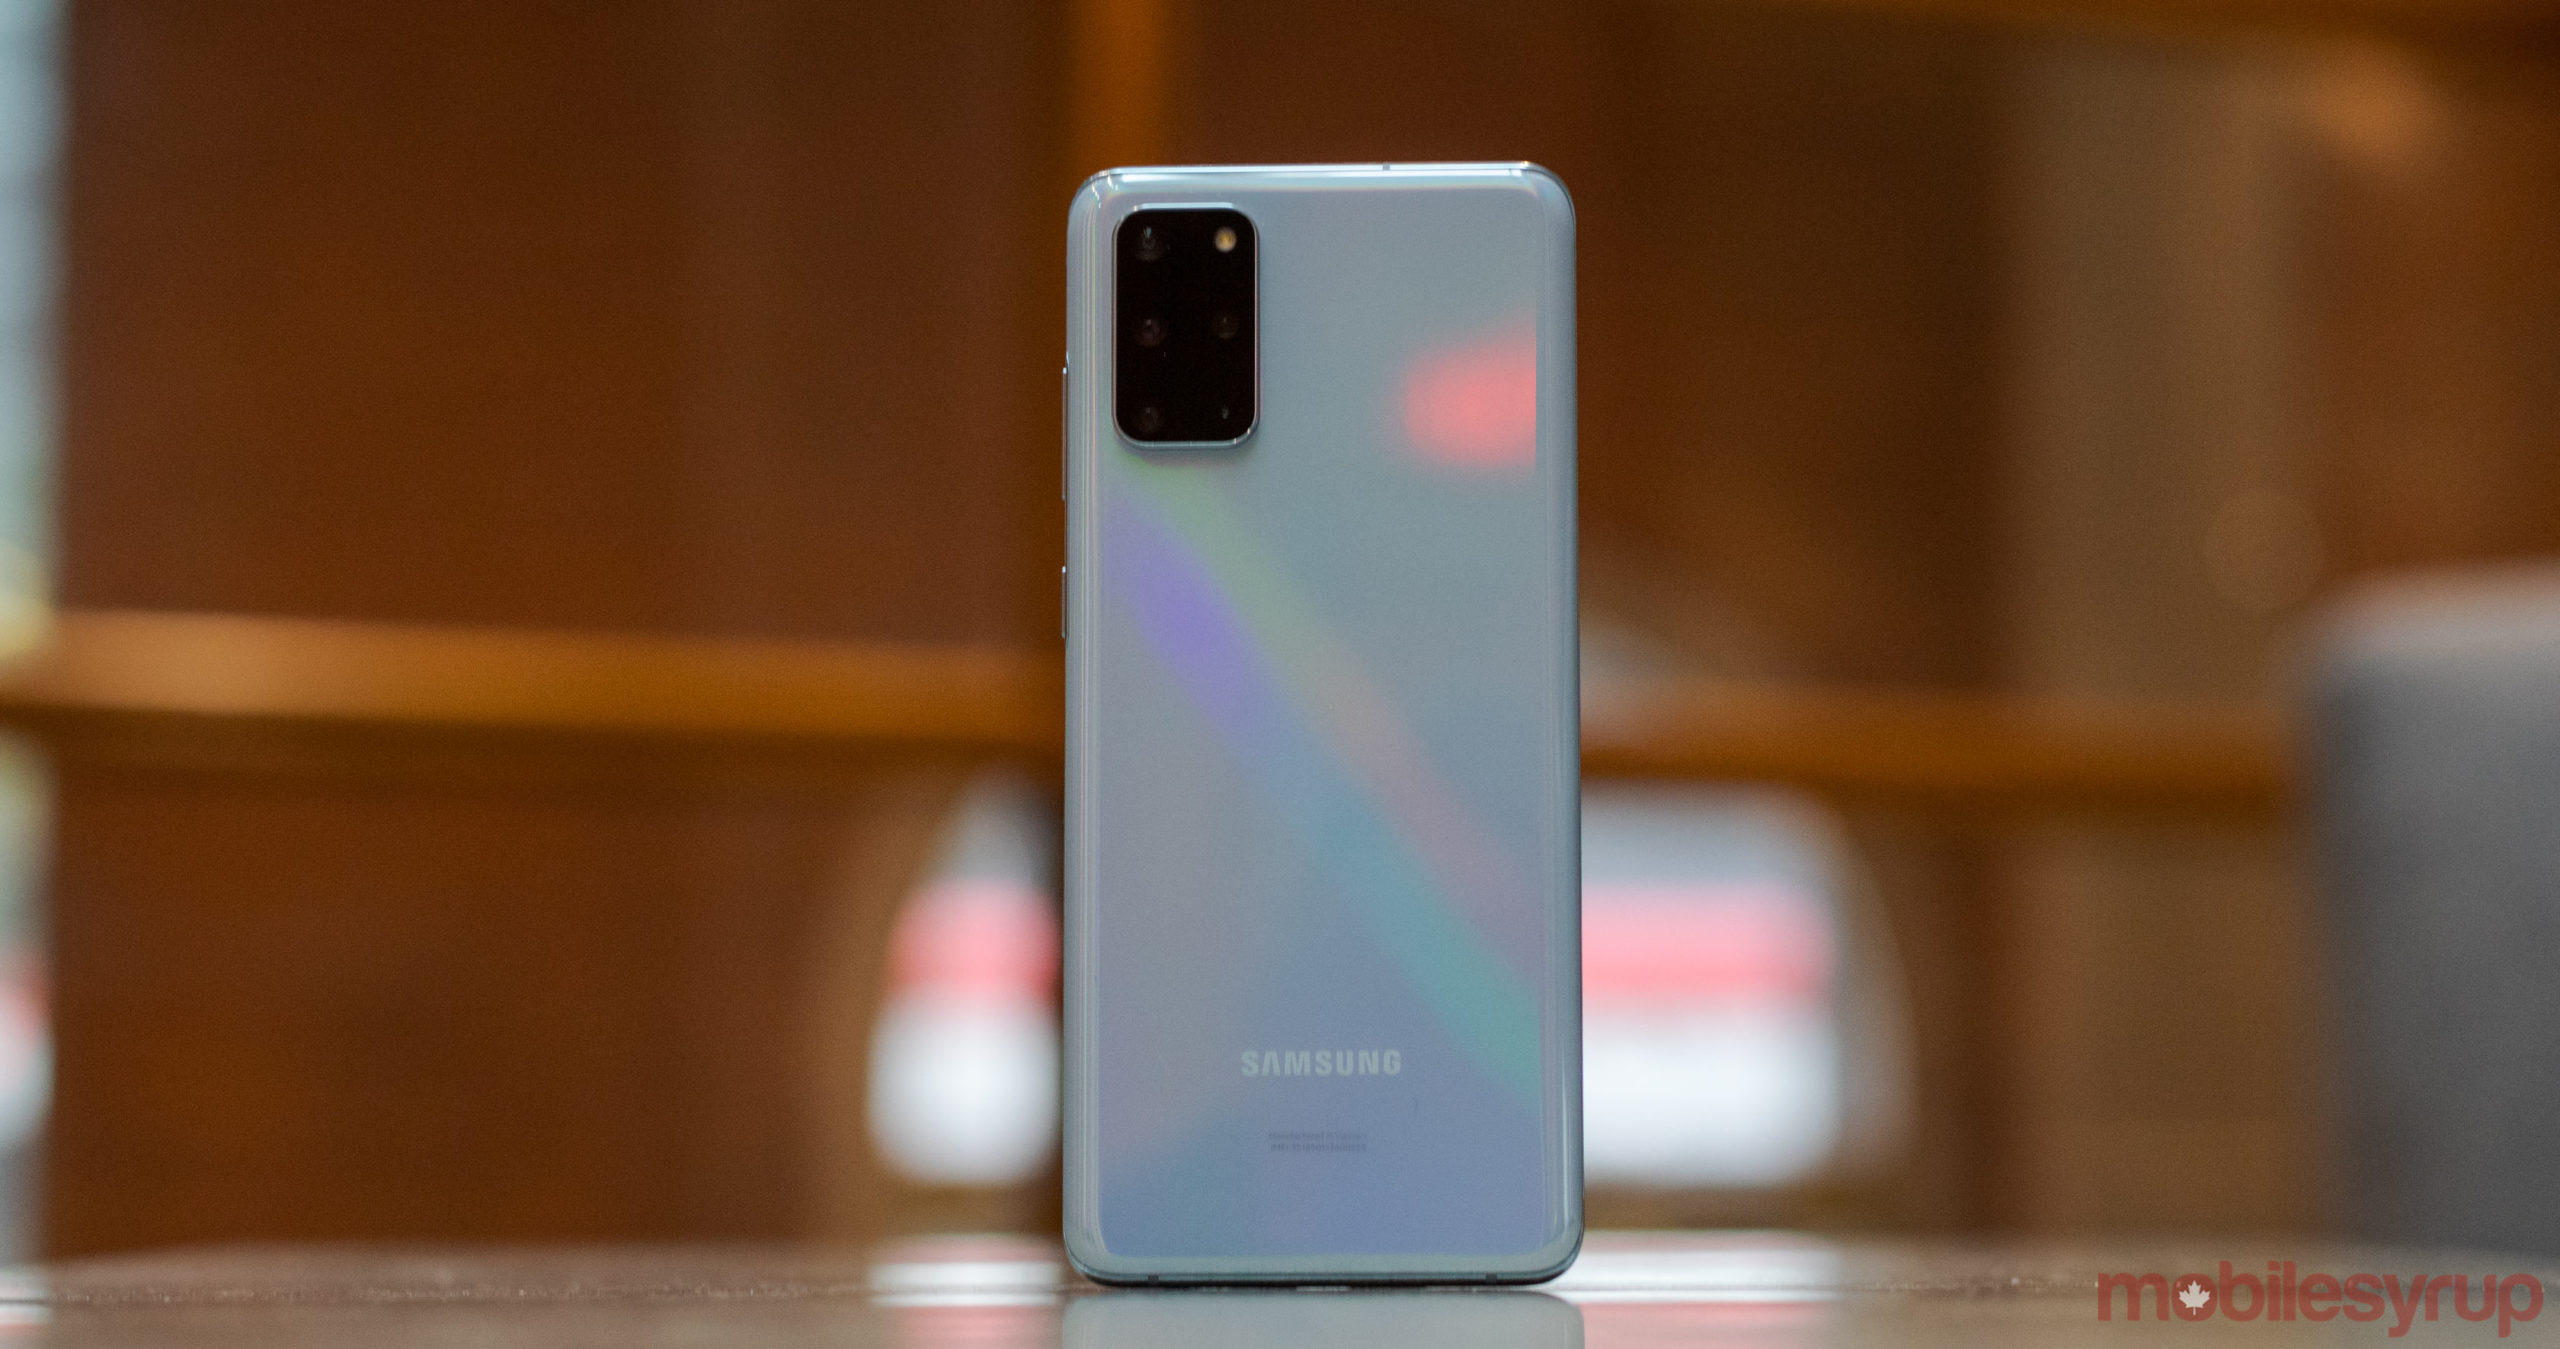 Samsung Galaxy S20+ Review: The phone to beat